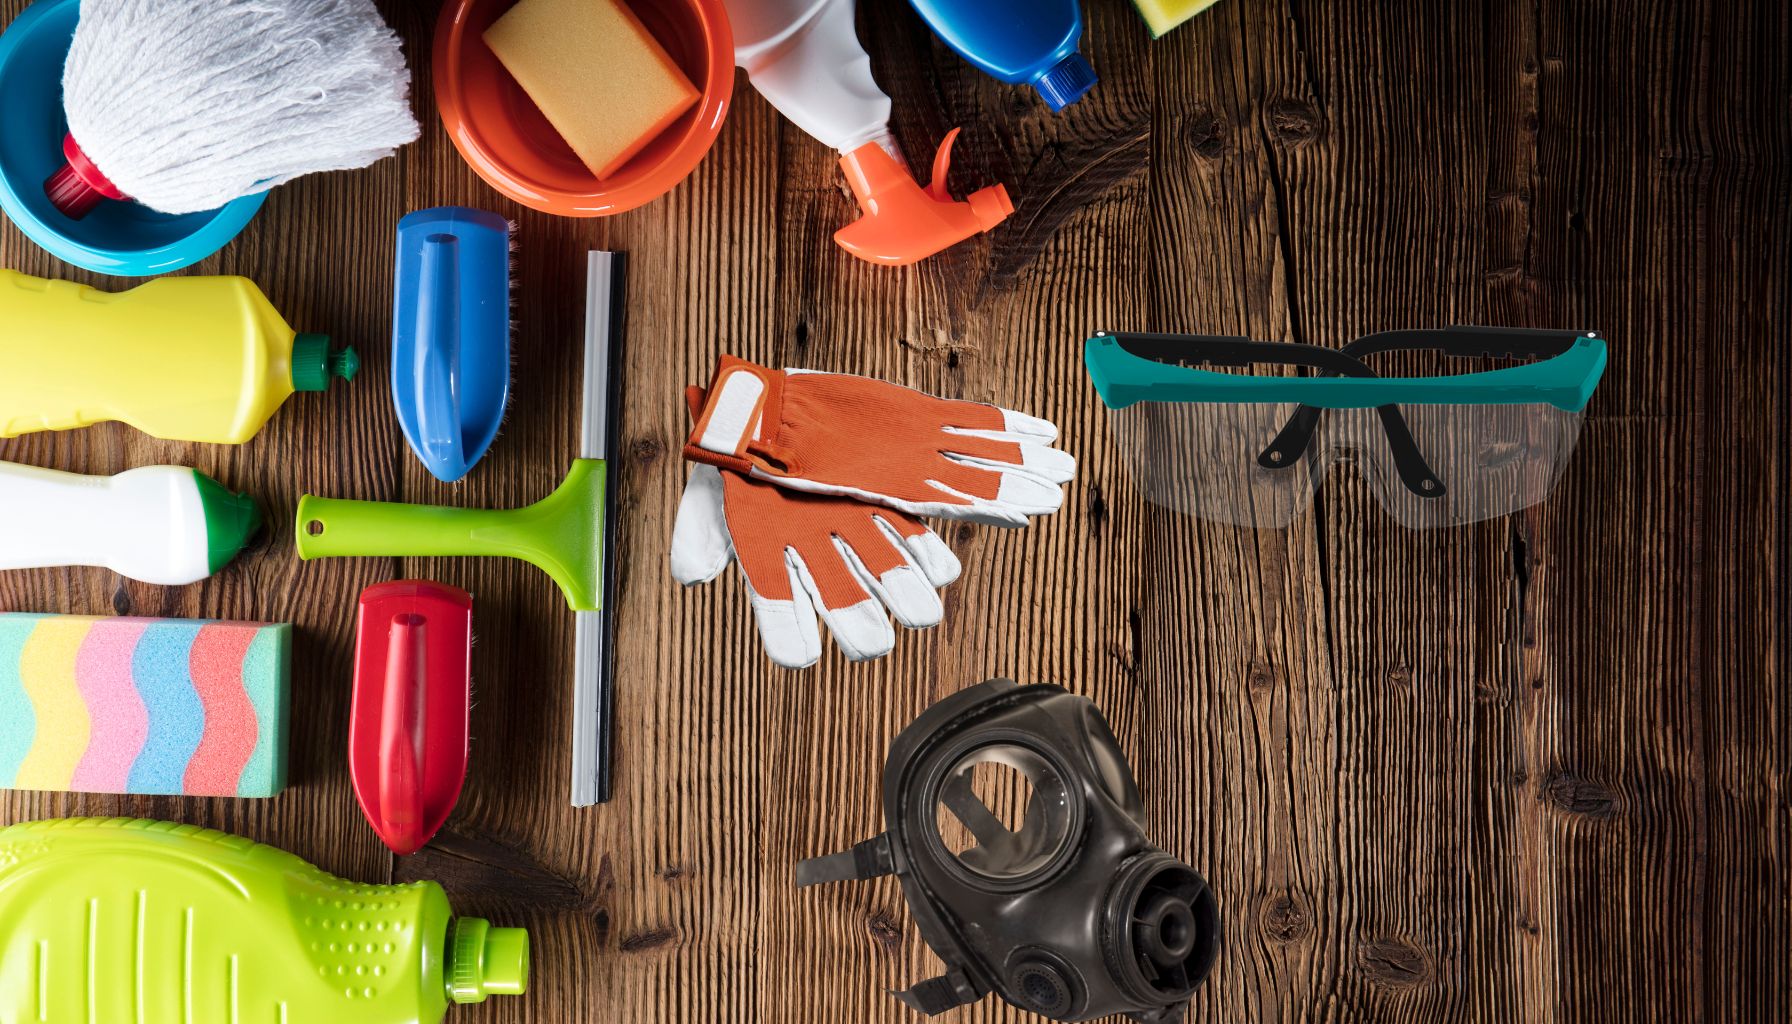 A variety of cleaning supplies and protective gear, including gloves, a mask, safety goggles, sponges, bottles, and a squeegee for mold restoration or water damage restoration, all arranged on a wooden surface. -PureOneServices